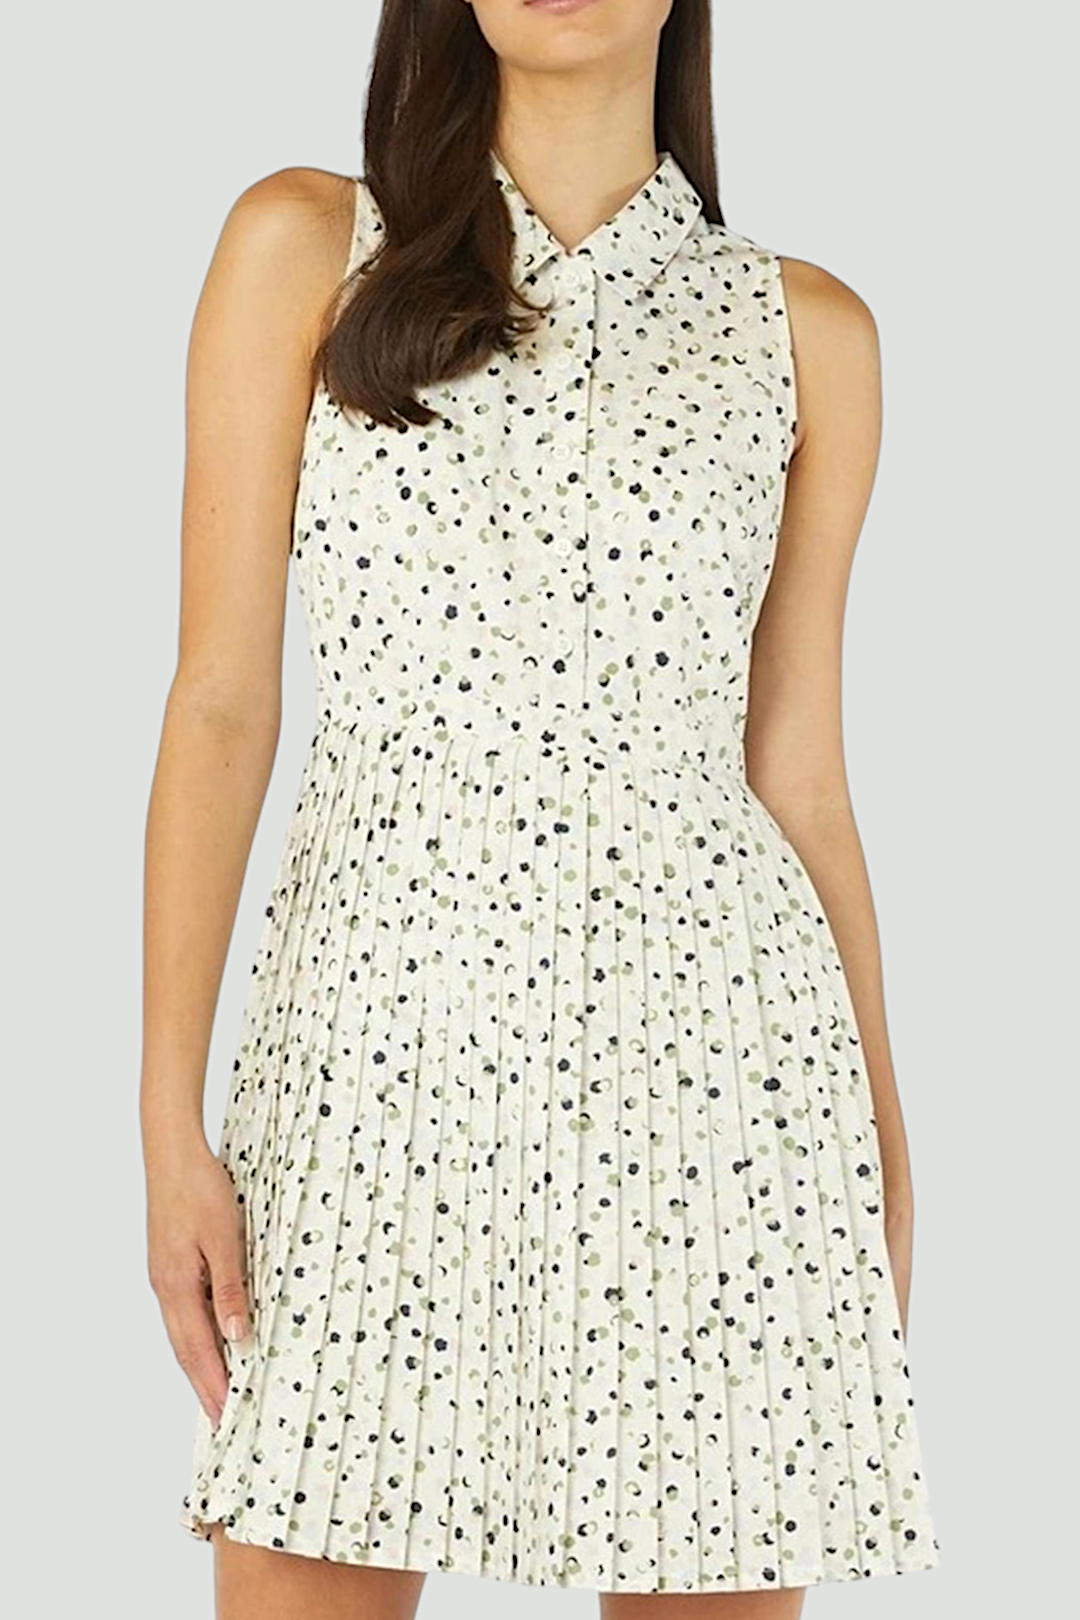 Alannah Hill Confessions Dress in Cream with Polka Dots